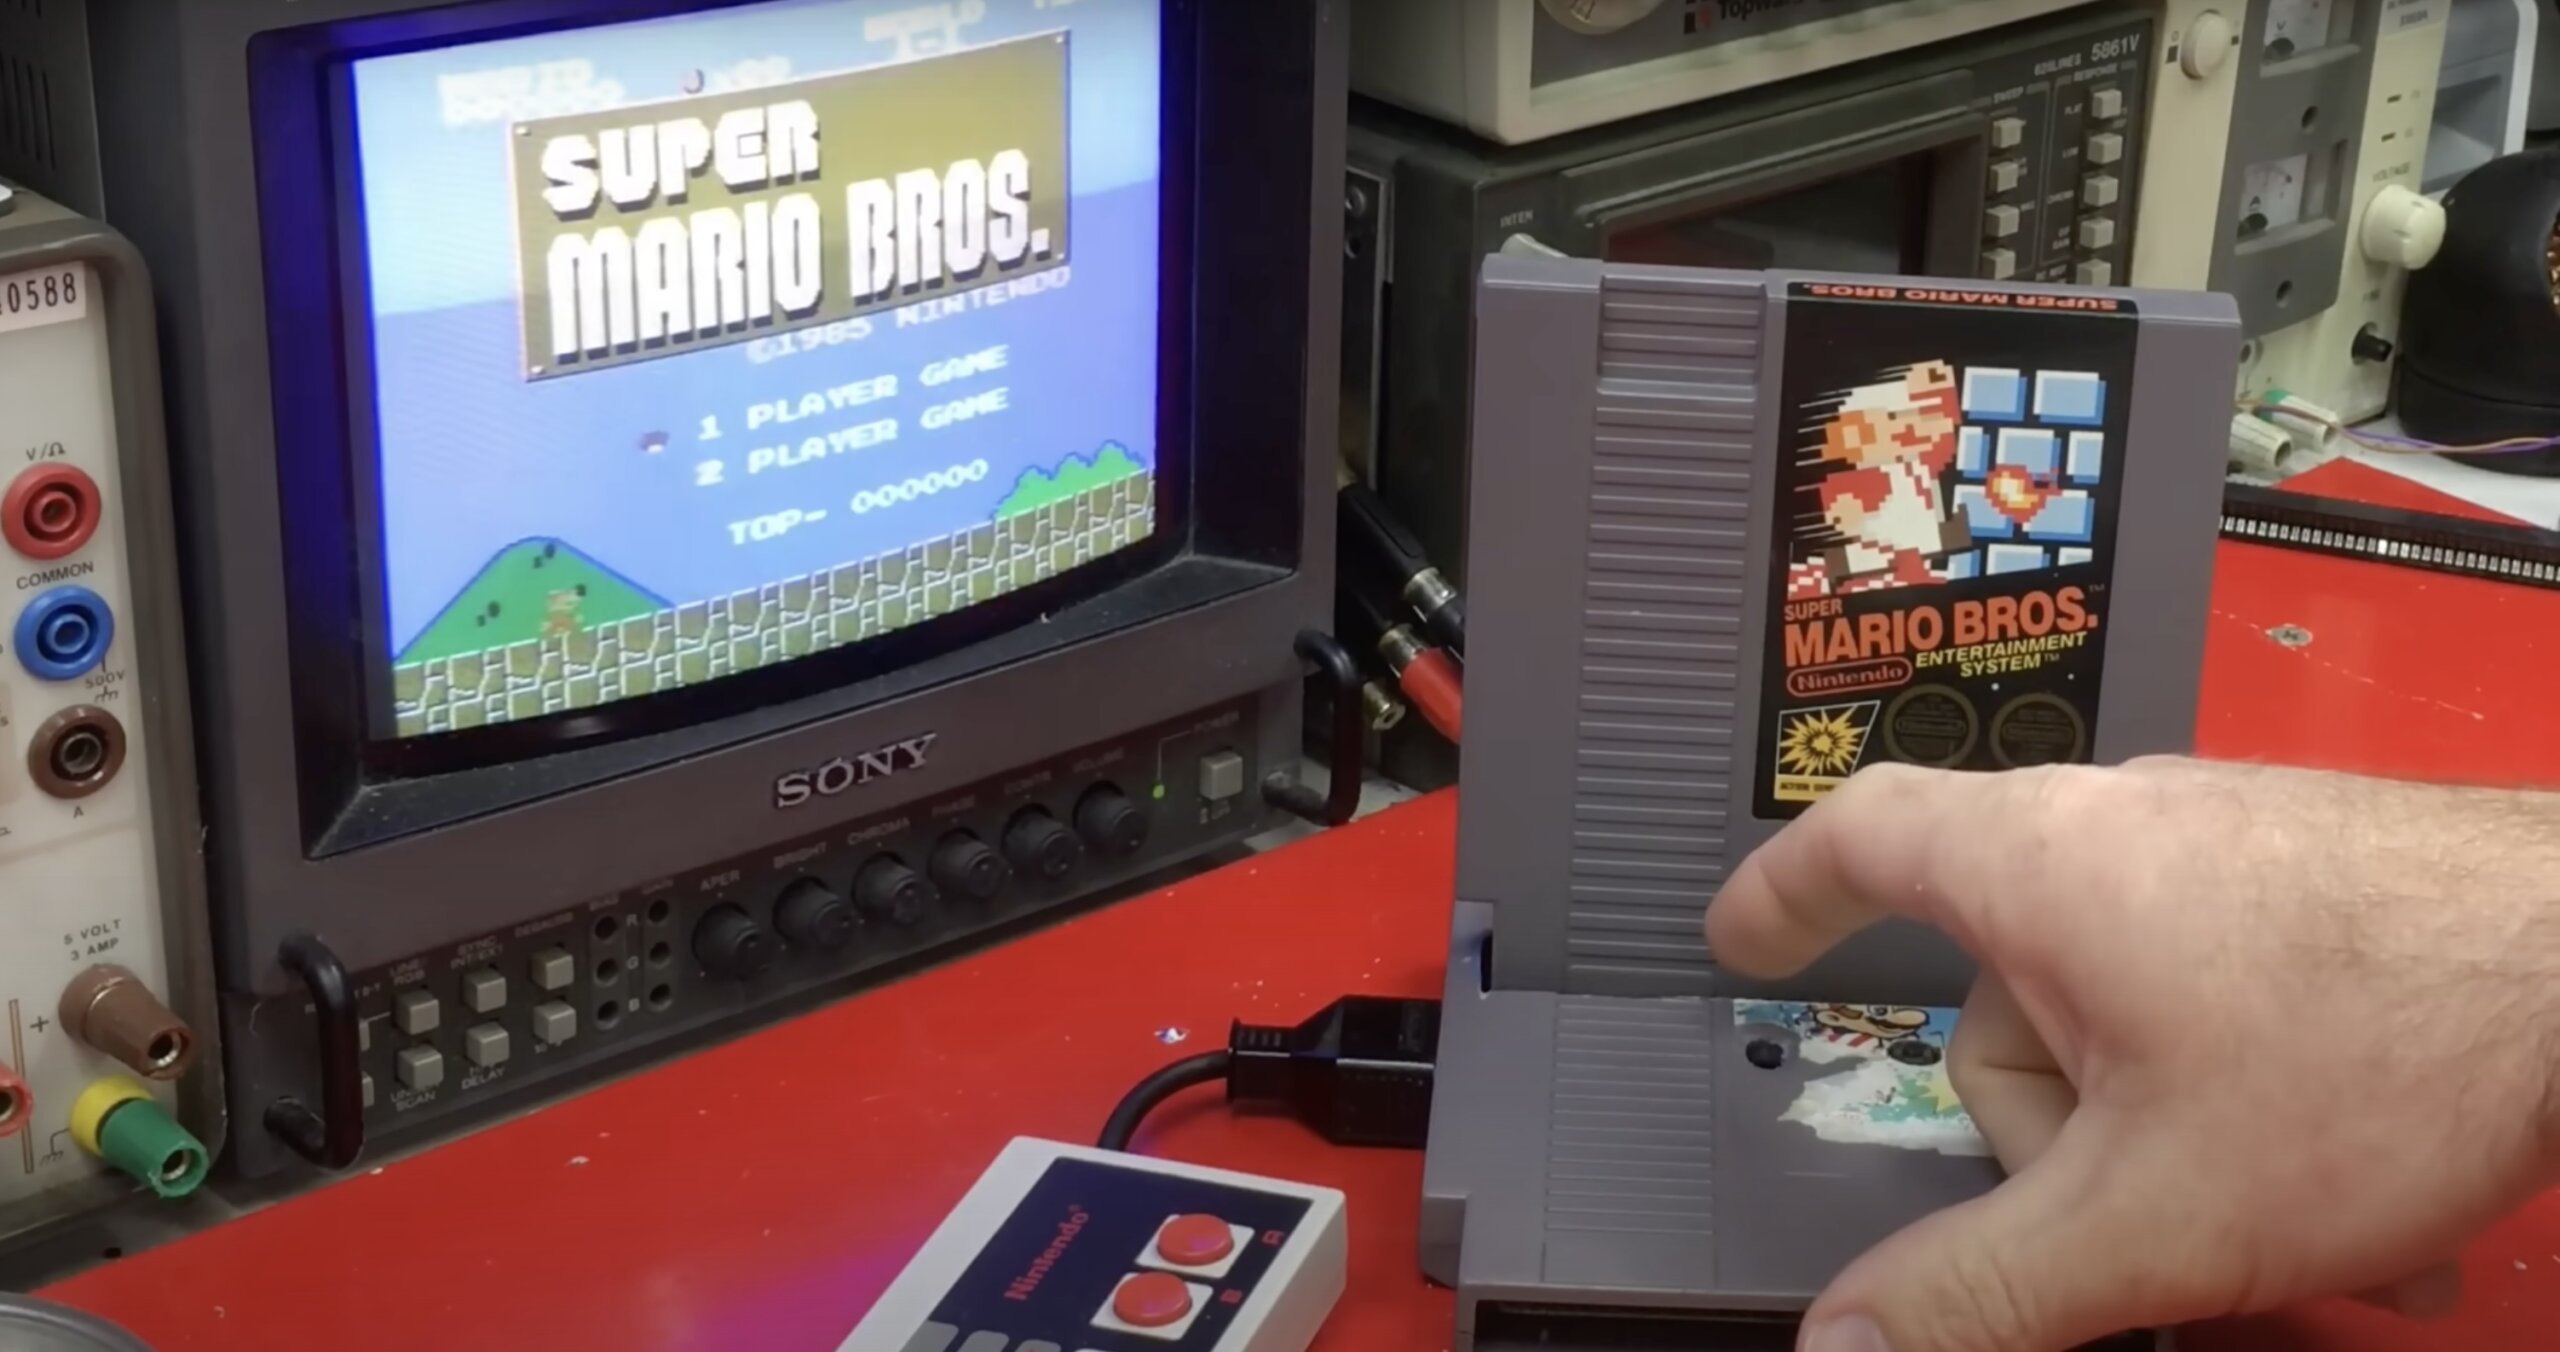 A NES Cartridge playing another game after being turned into a console through modding